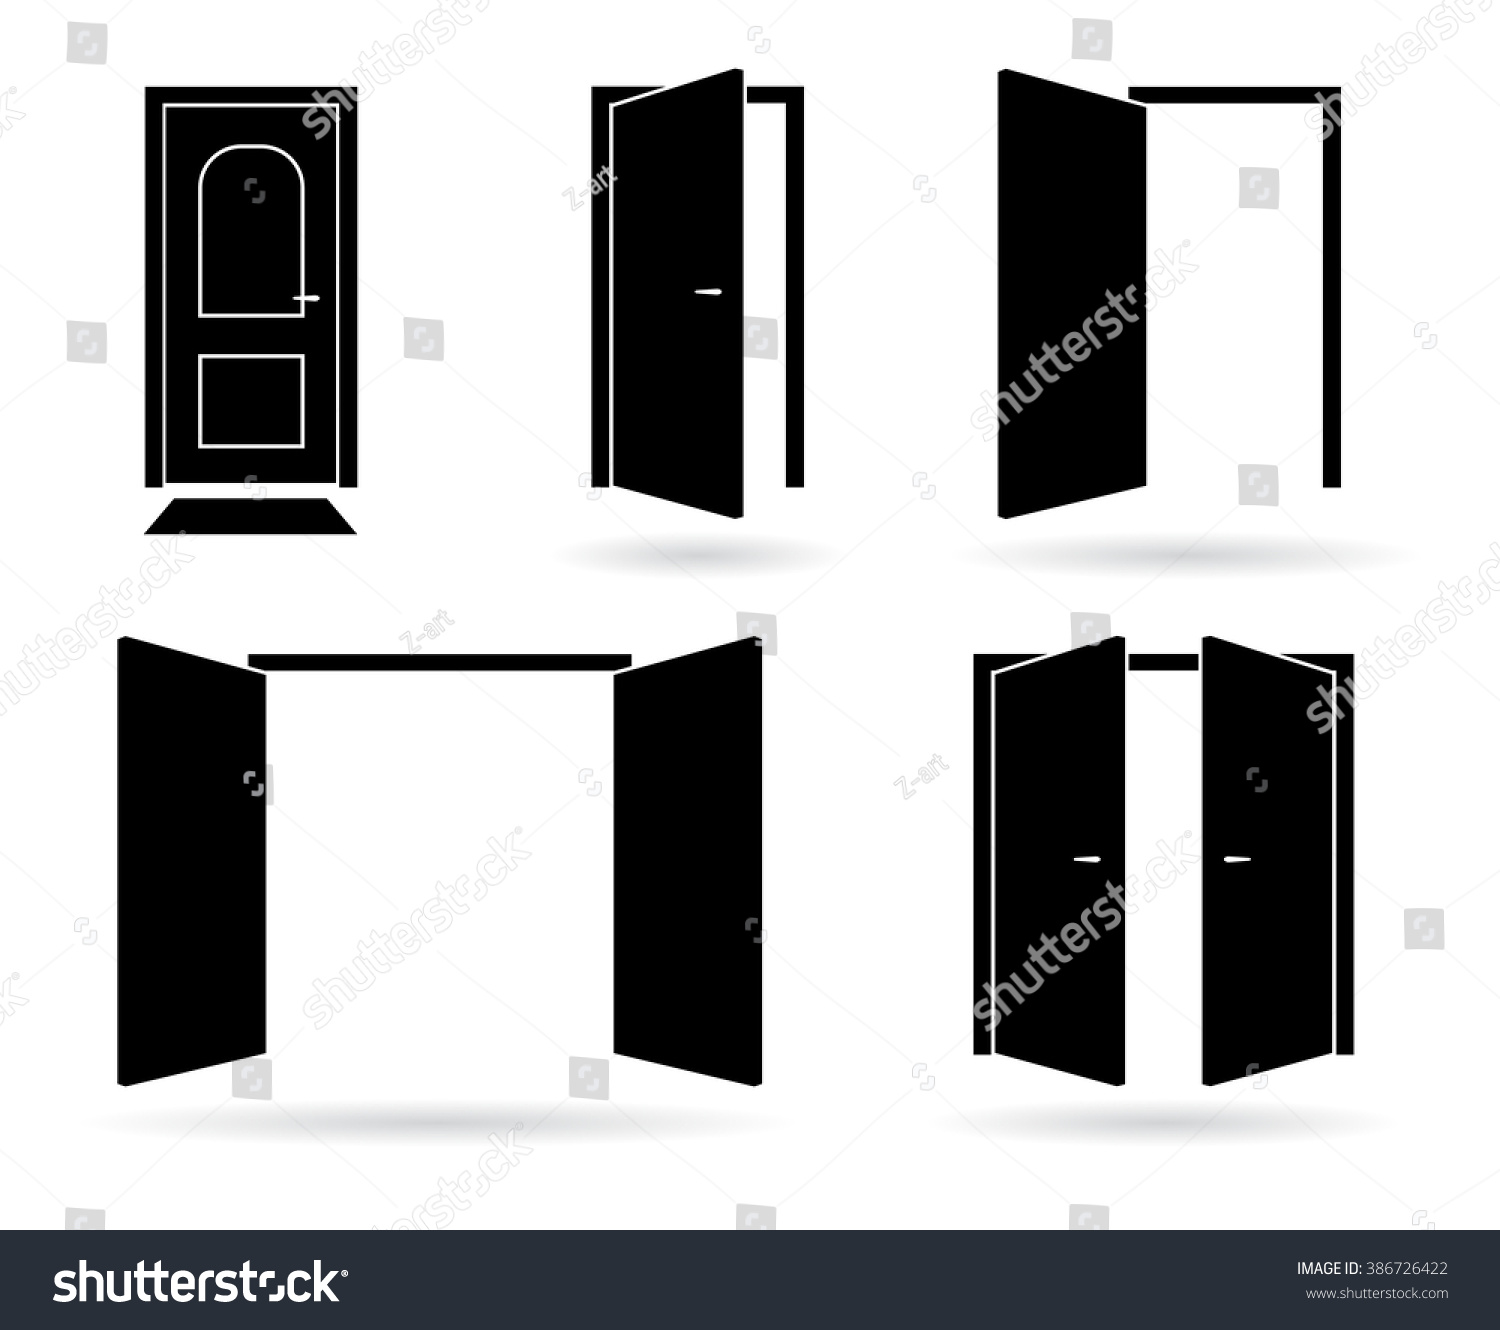 Old western swinging saloon doors icon in flat style isolated on 